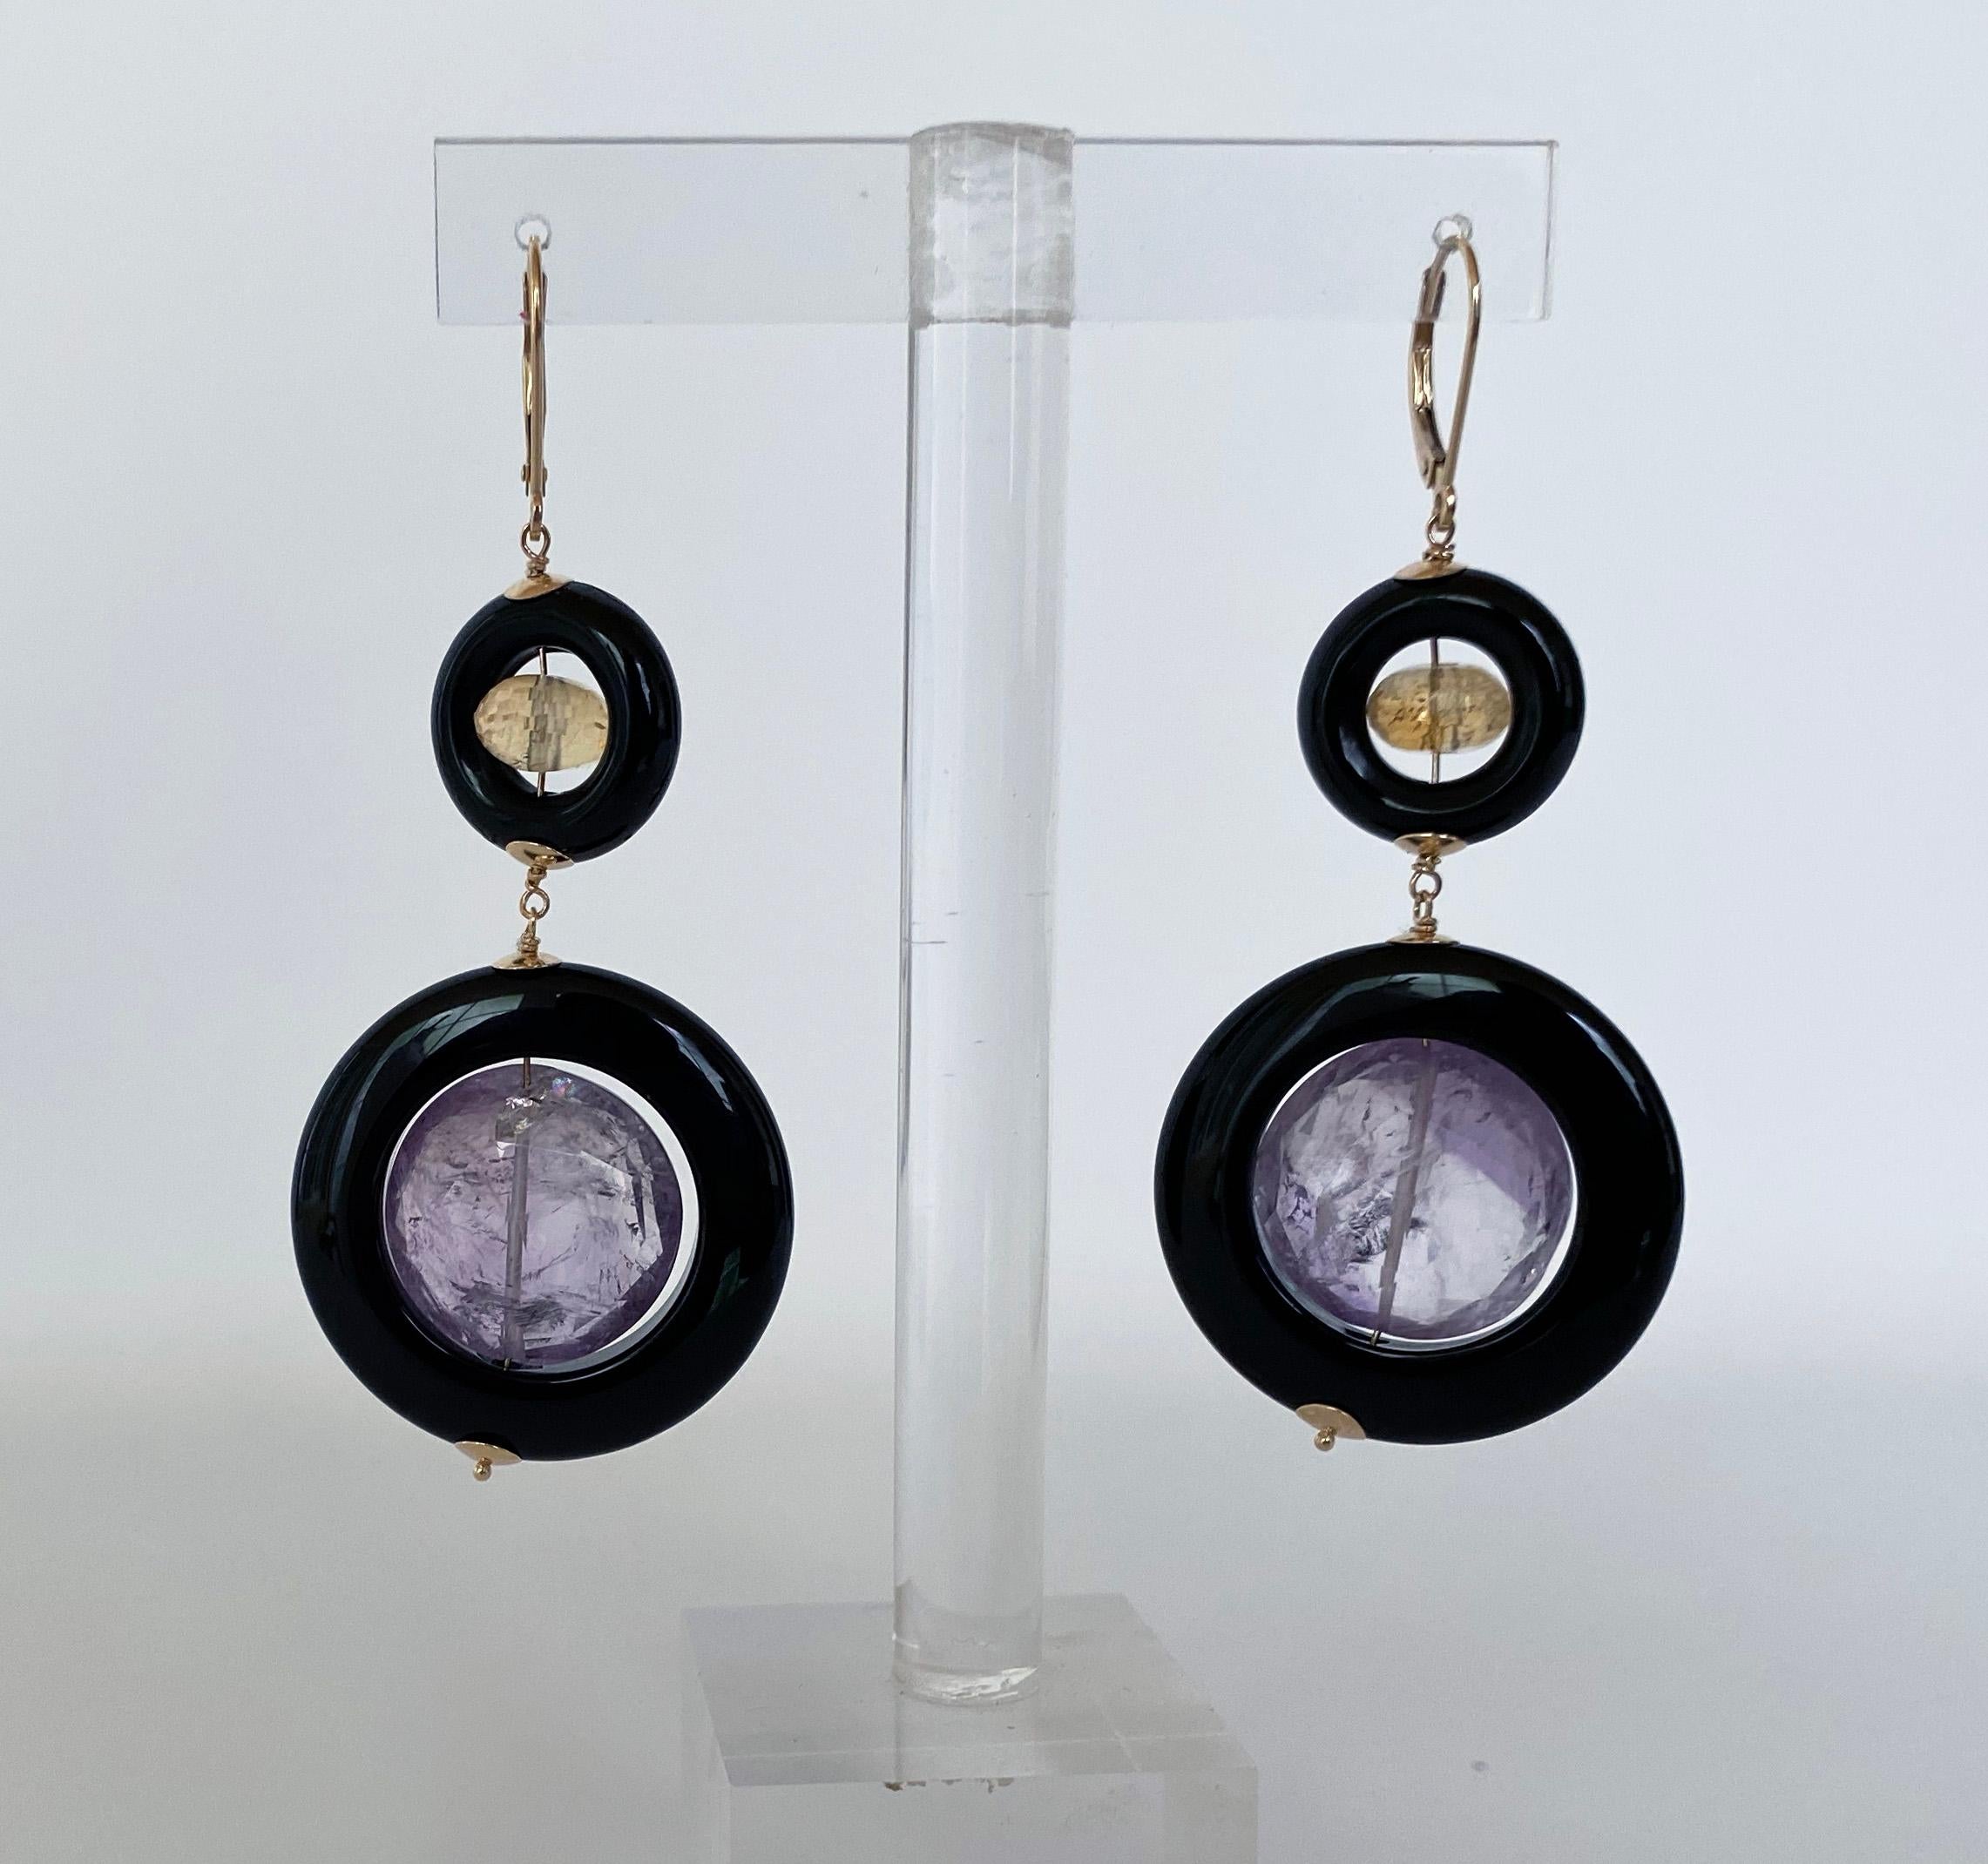 These elegant dangle earrings display beautifully bright and complimentary gemstones. This piece features faceted Cirtrine and large Amethyst beads freely moving within Black Onyx rings. The Black Onyx is perfectly contrasted by 14K Yellow Gold